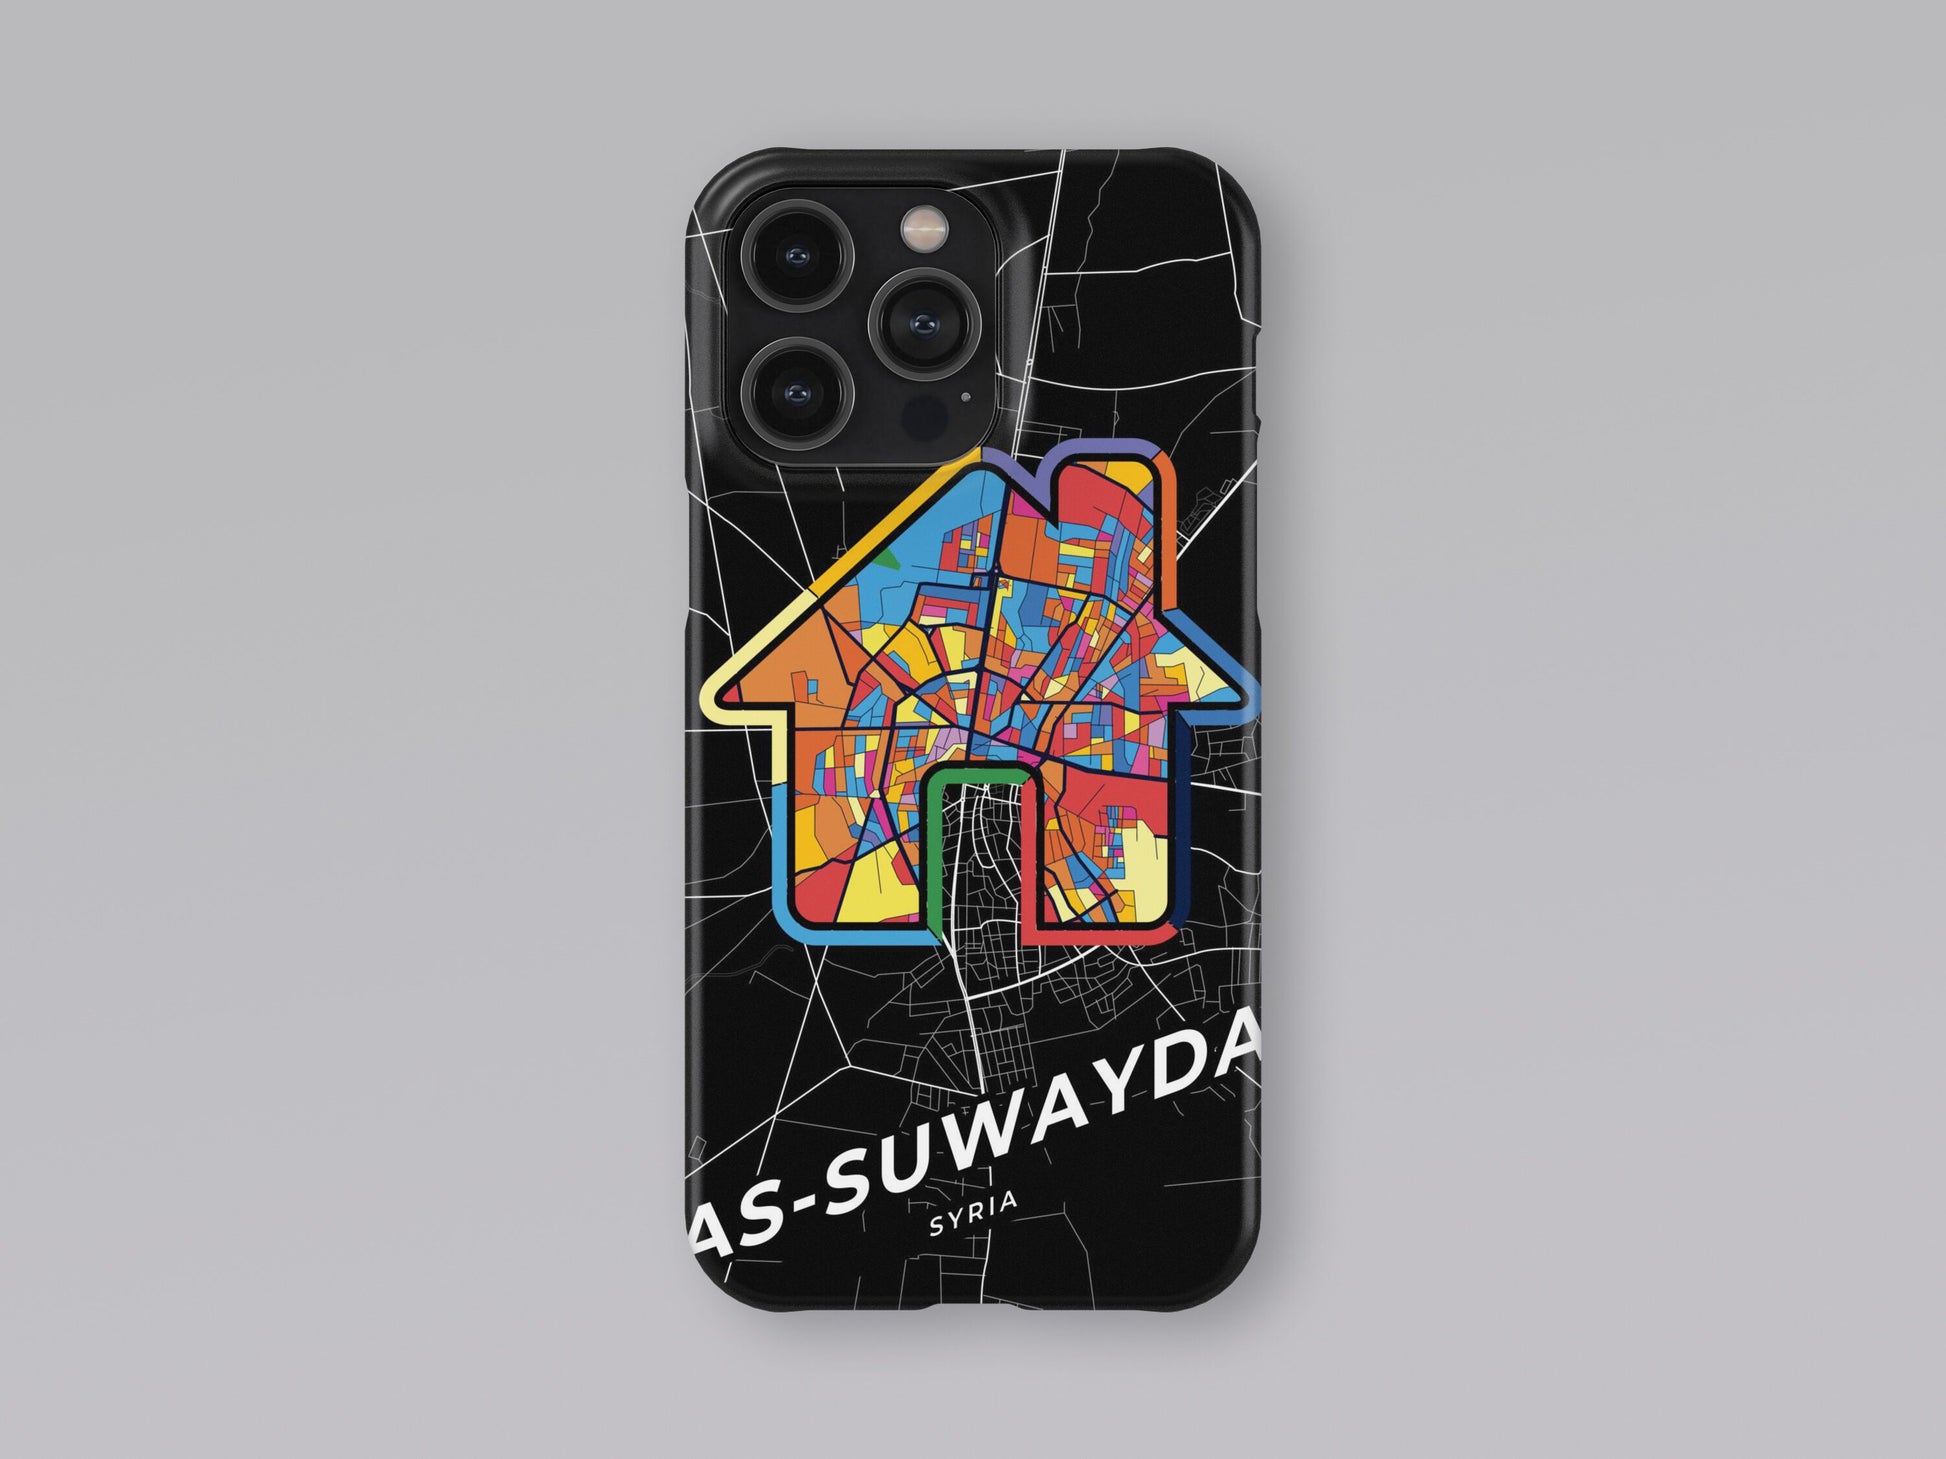 As-Suwayda Syria slim phone case with colorful icon. Birthday, wedding or housewarming gift. Couple match cases. 3